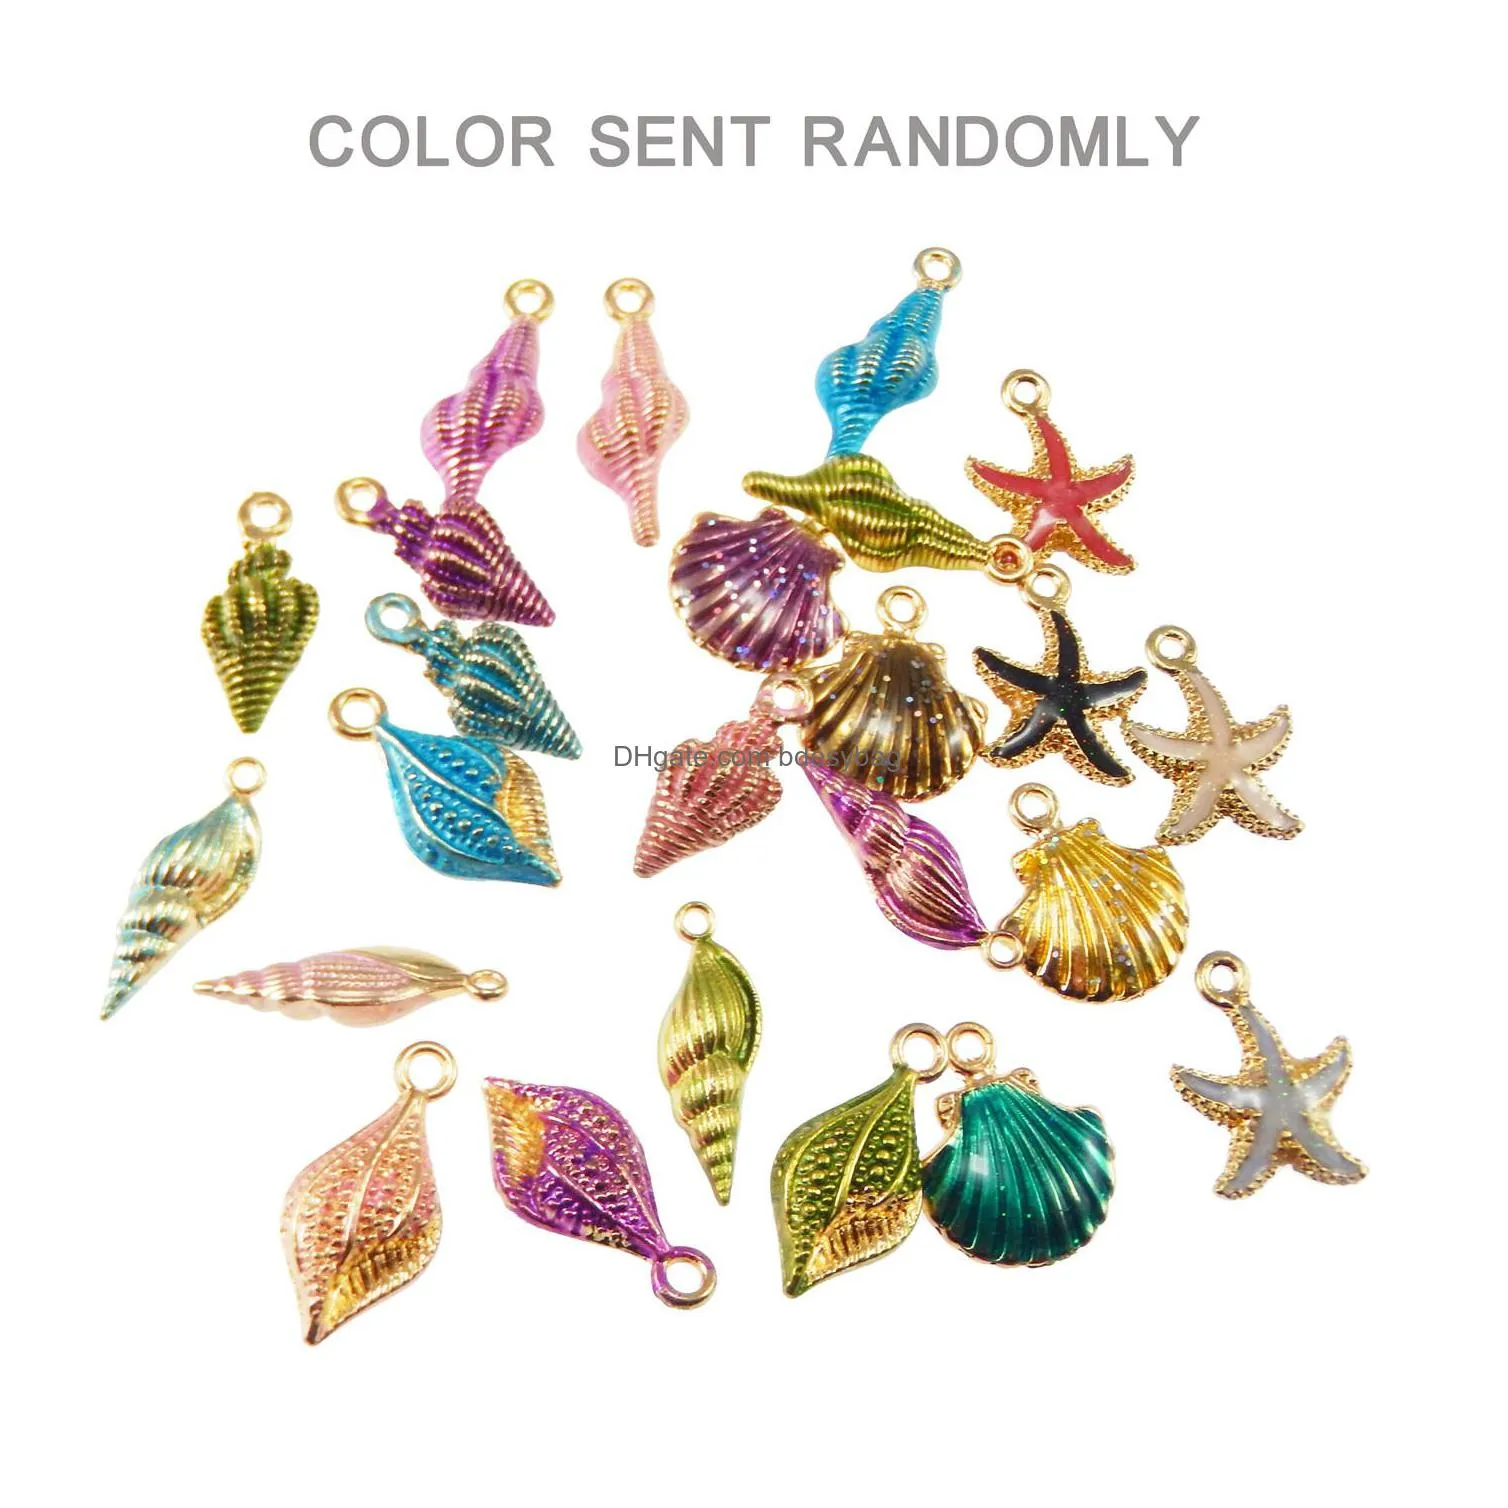 exquisite ornaments 49 pieces of color alloy enamel mixed shell starfish conch jewelry pendant crafts discovery randomly send